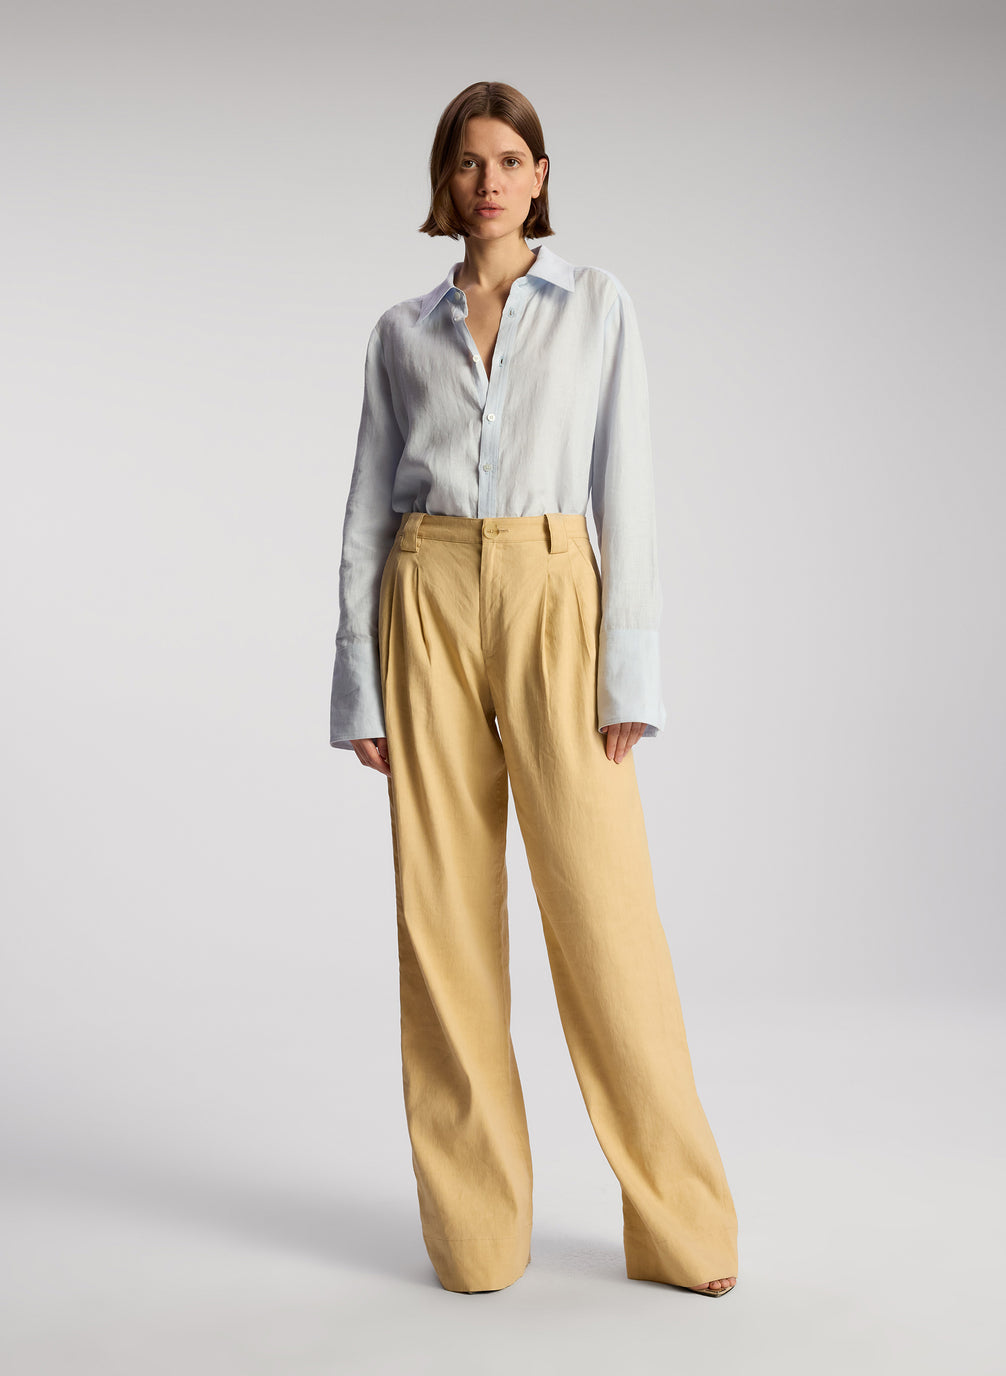 front view of woman wearing light blue linen button down shirt and tan pants